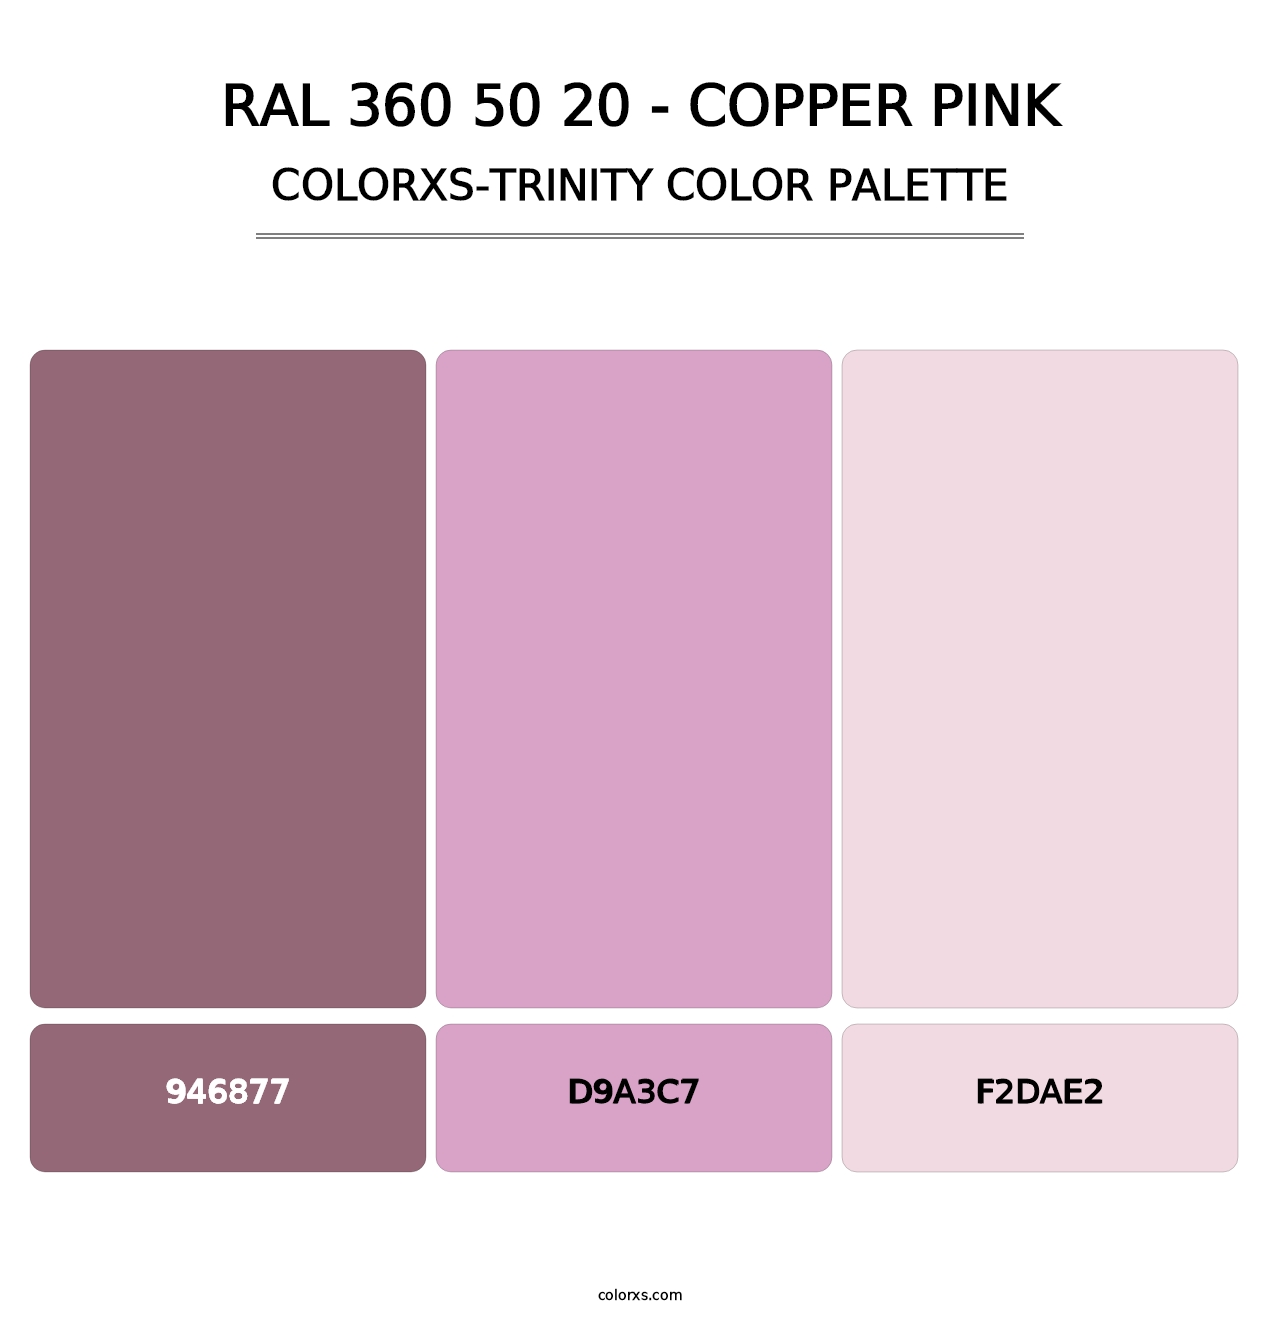 RAL 360 50 20 - Copper Pink - Colorxs Trinity Palette